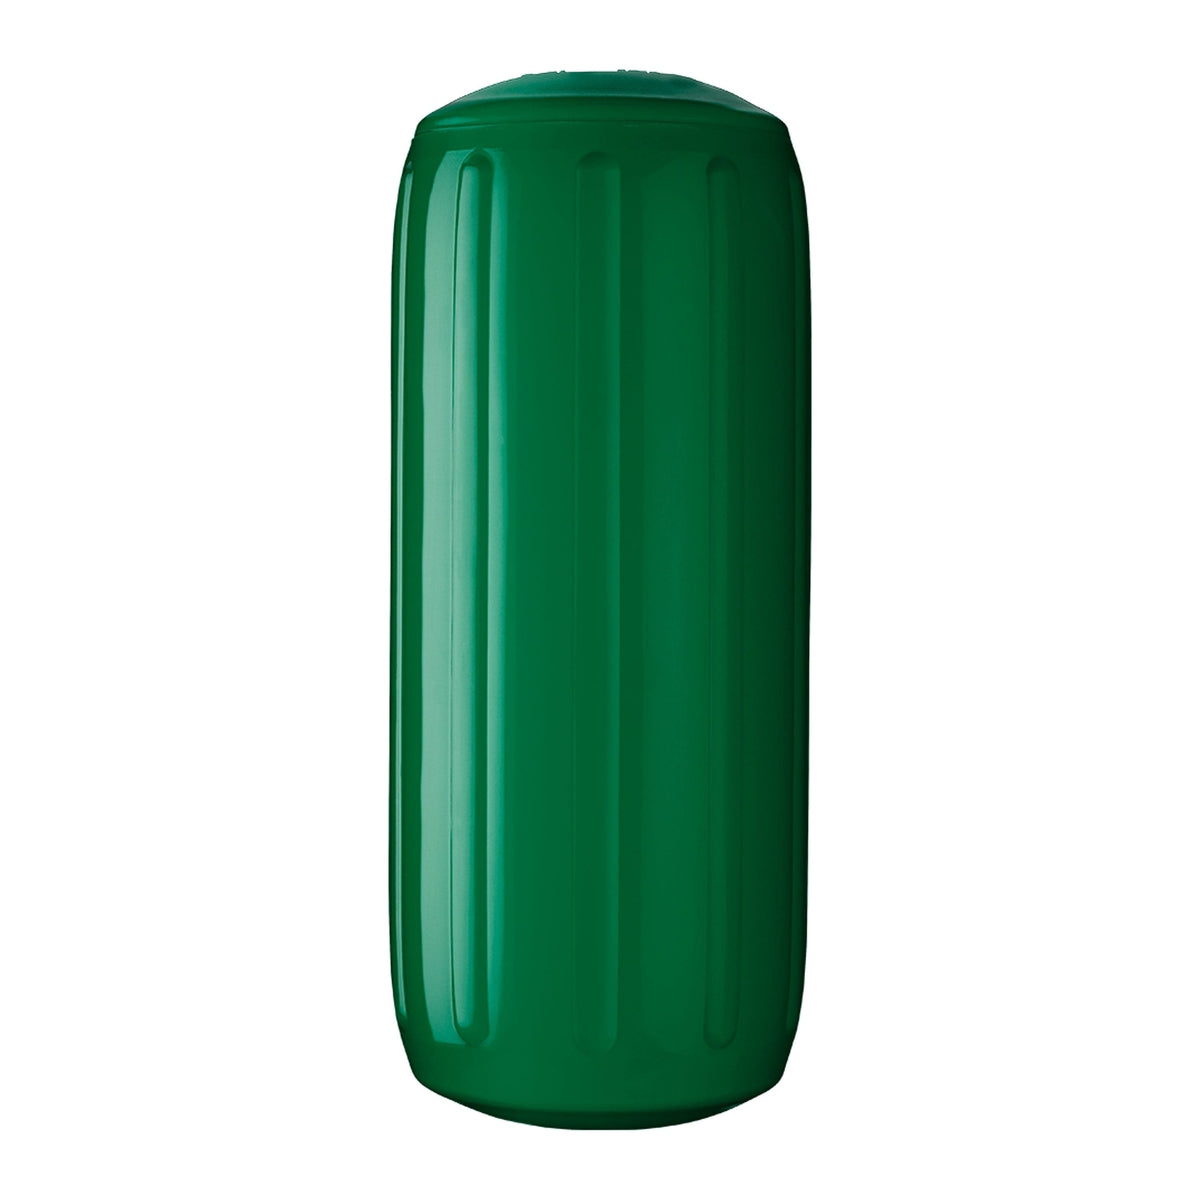 Polyform U.S. Qualifies for Free Shipping Polyform HTM-1 HTM-Series Fender 6.3" x 15.5" Forest Green #HTM-1-FRST-GRN